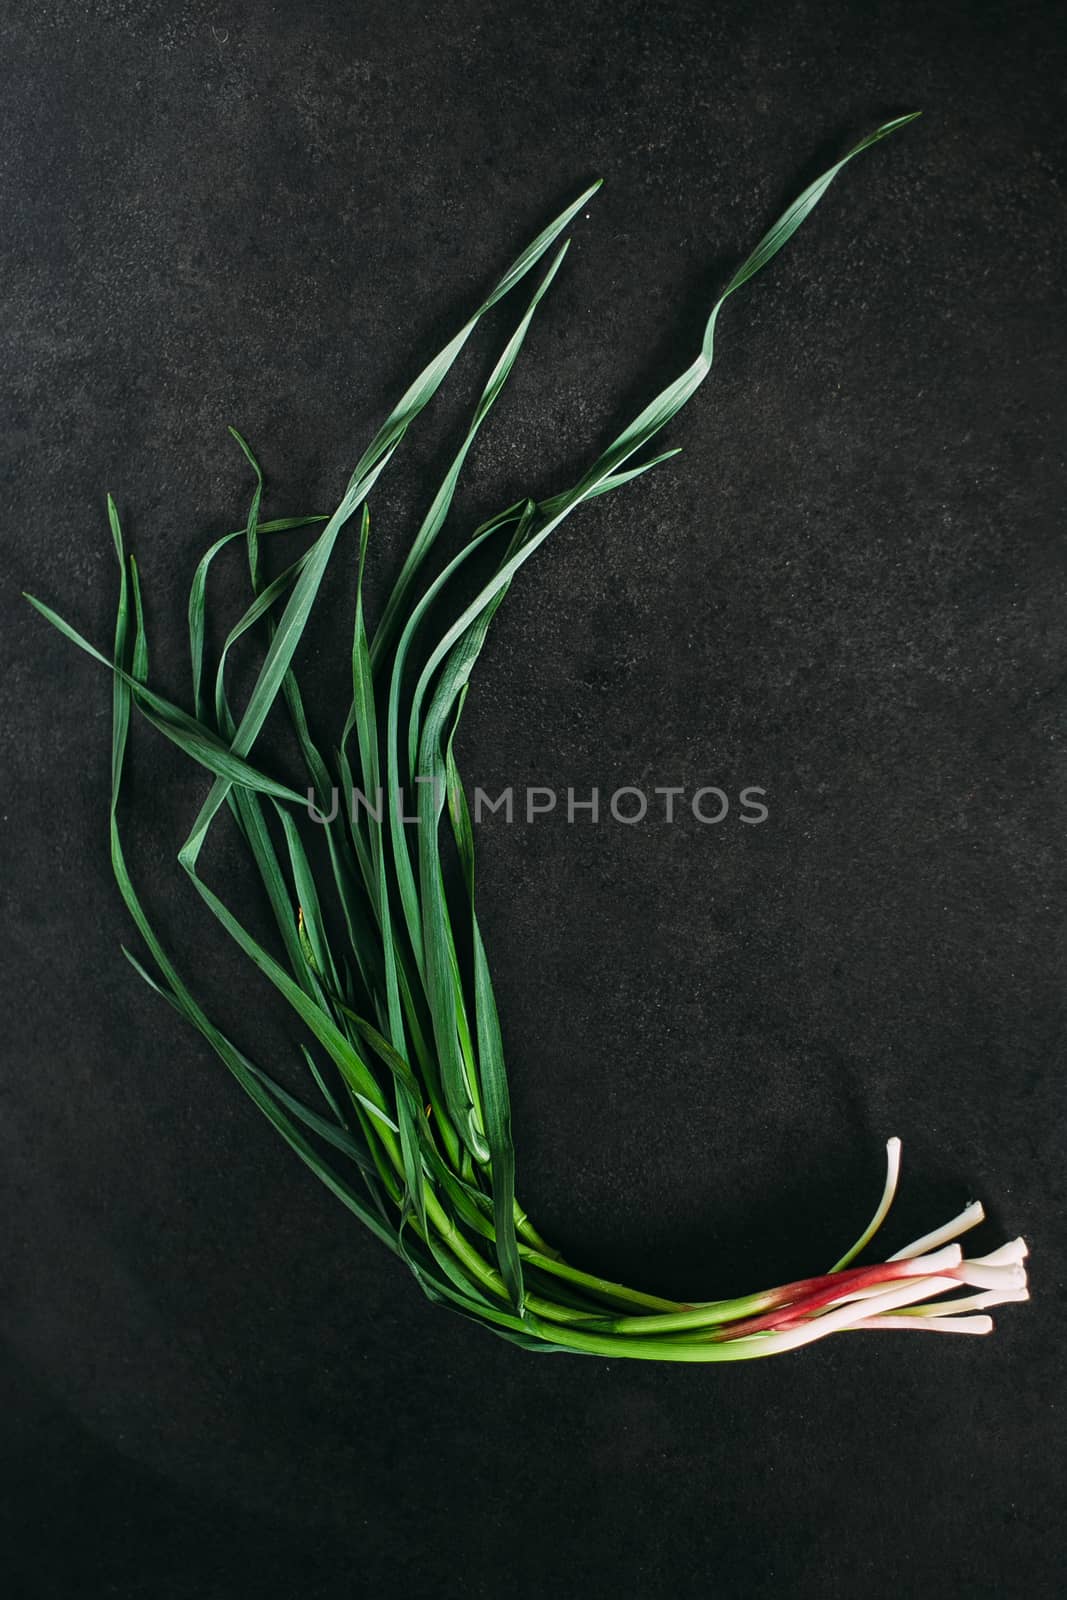 Green onions on black granite by Opikanets